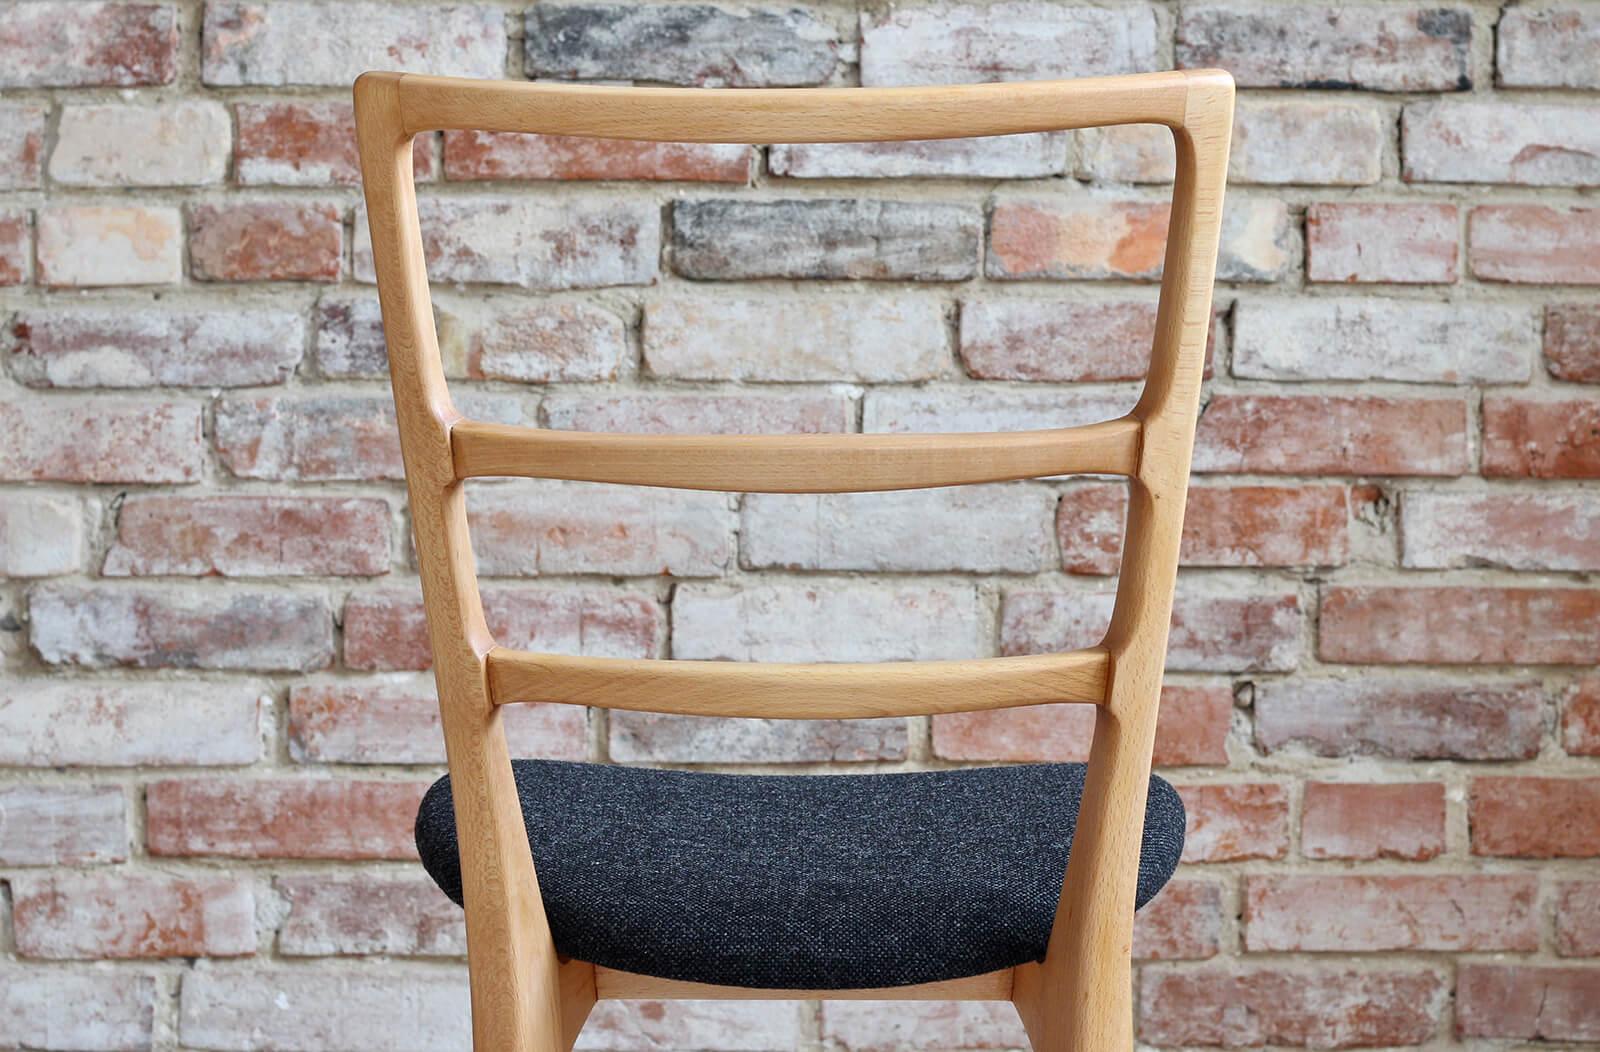 Set of 6 Dining Chairs by Marian Grabiński, Midcentury, Reupholstered in Kvadrat 2